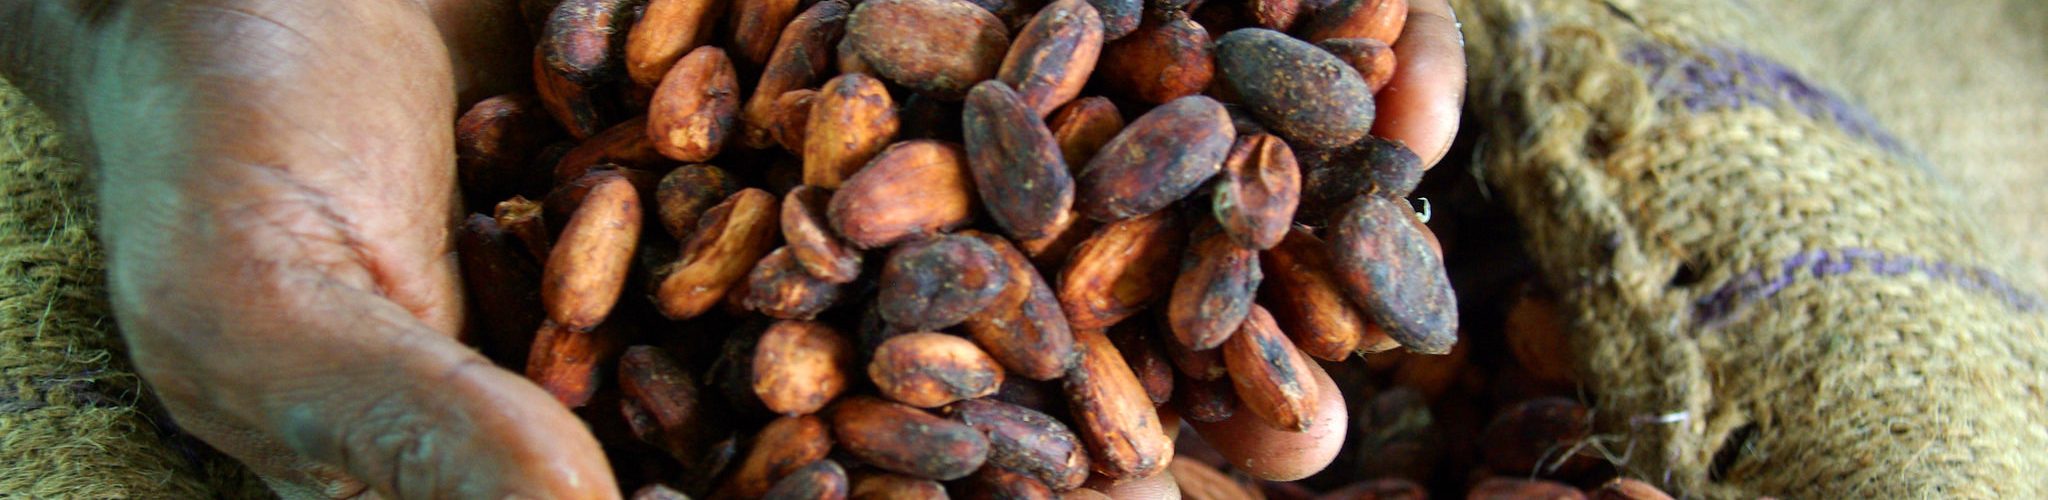 Dried cocoa beans ready for export (Irene Scott/DFAT/Flickr/CC BY 2.0)